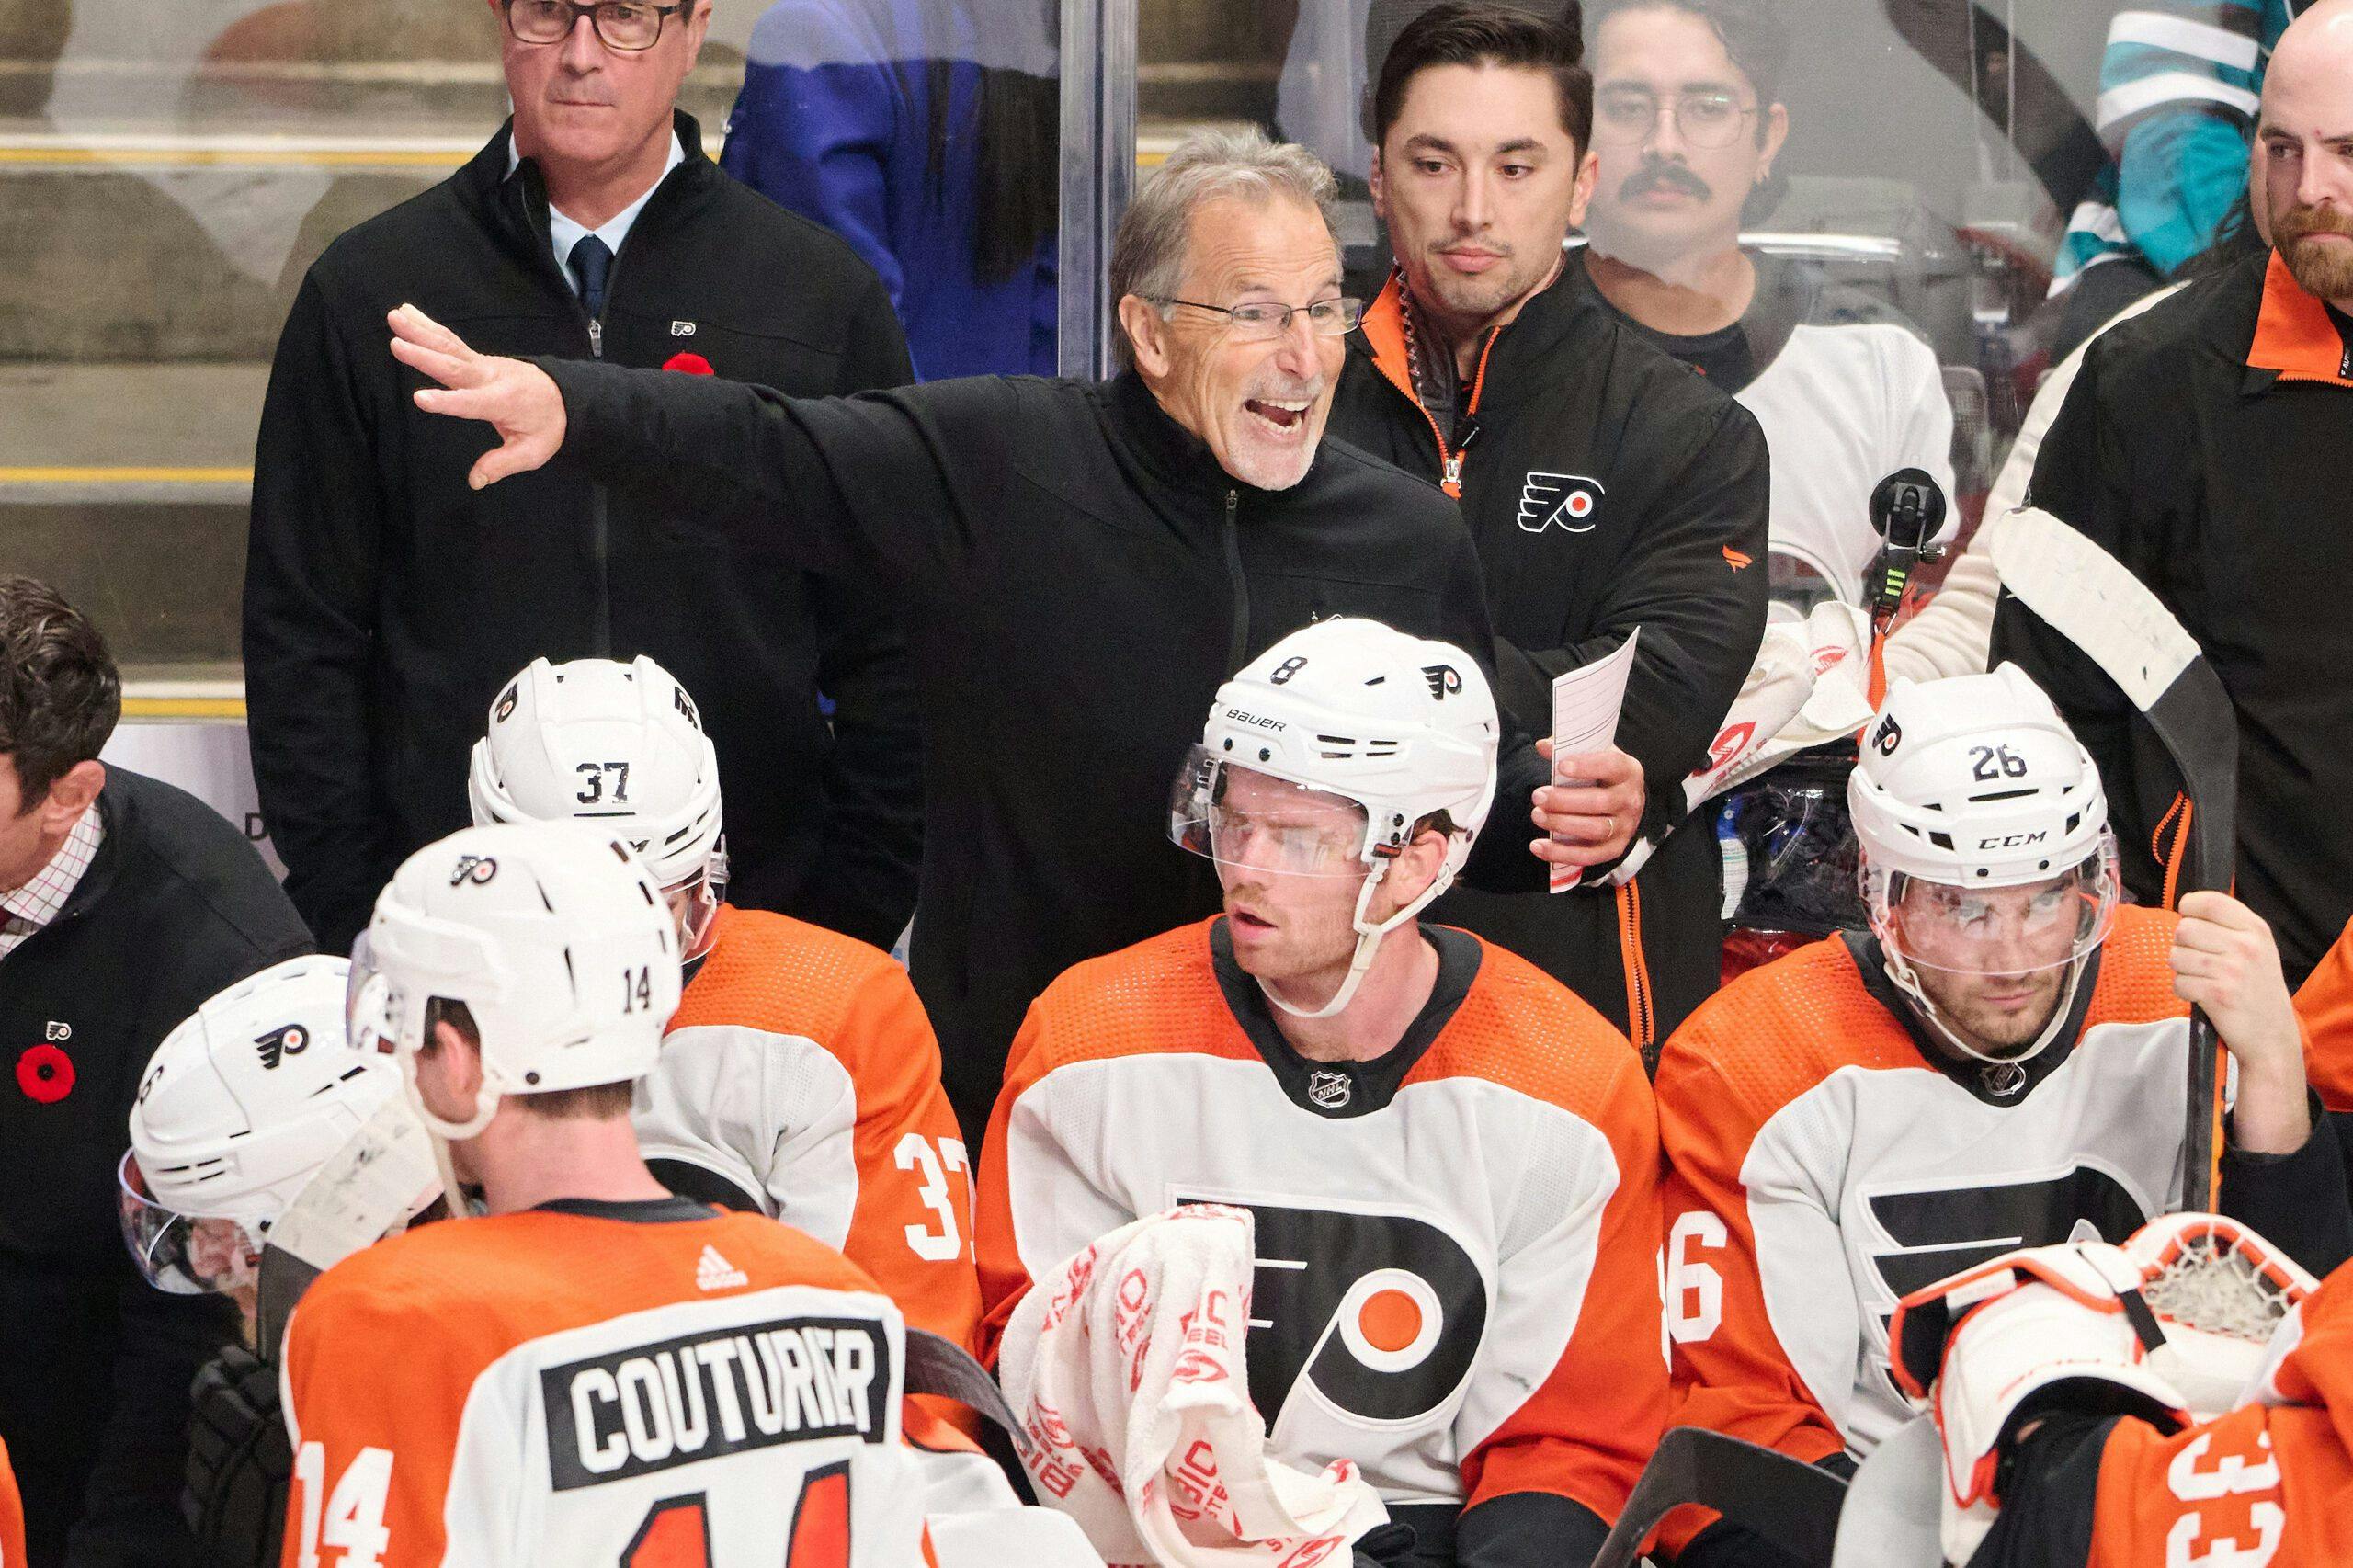 Flyers coach John Tortorella: ‘If players are going to quit on me, you’ve got the wrong damn coach here’